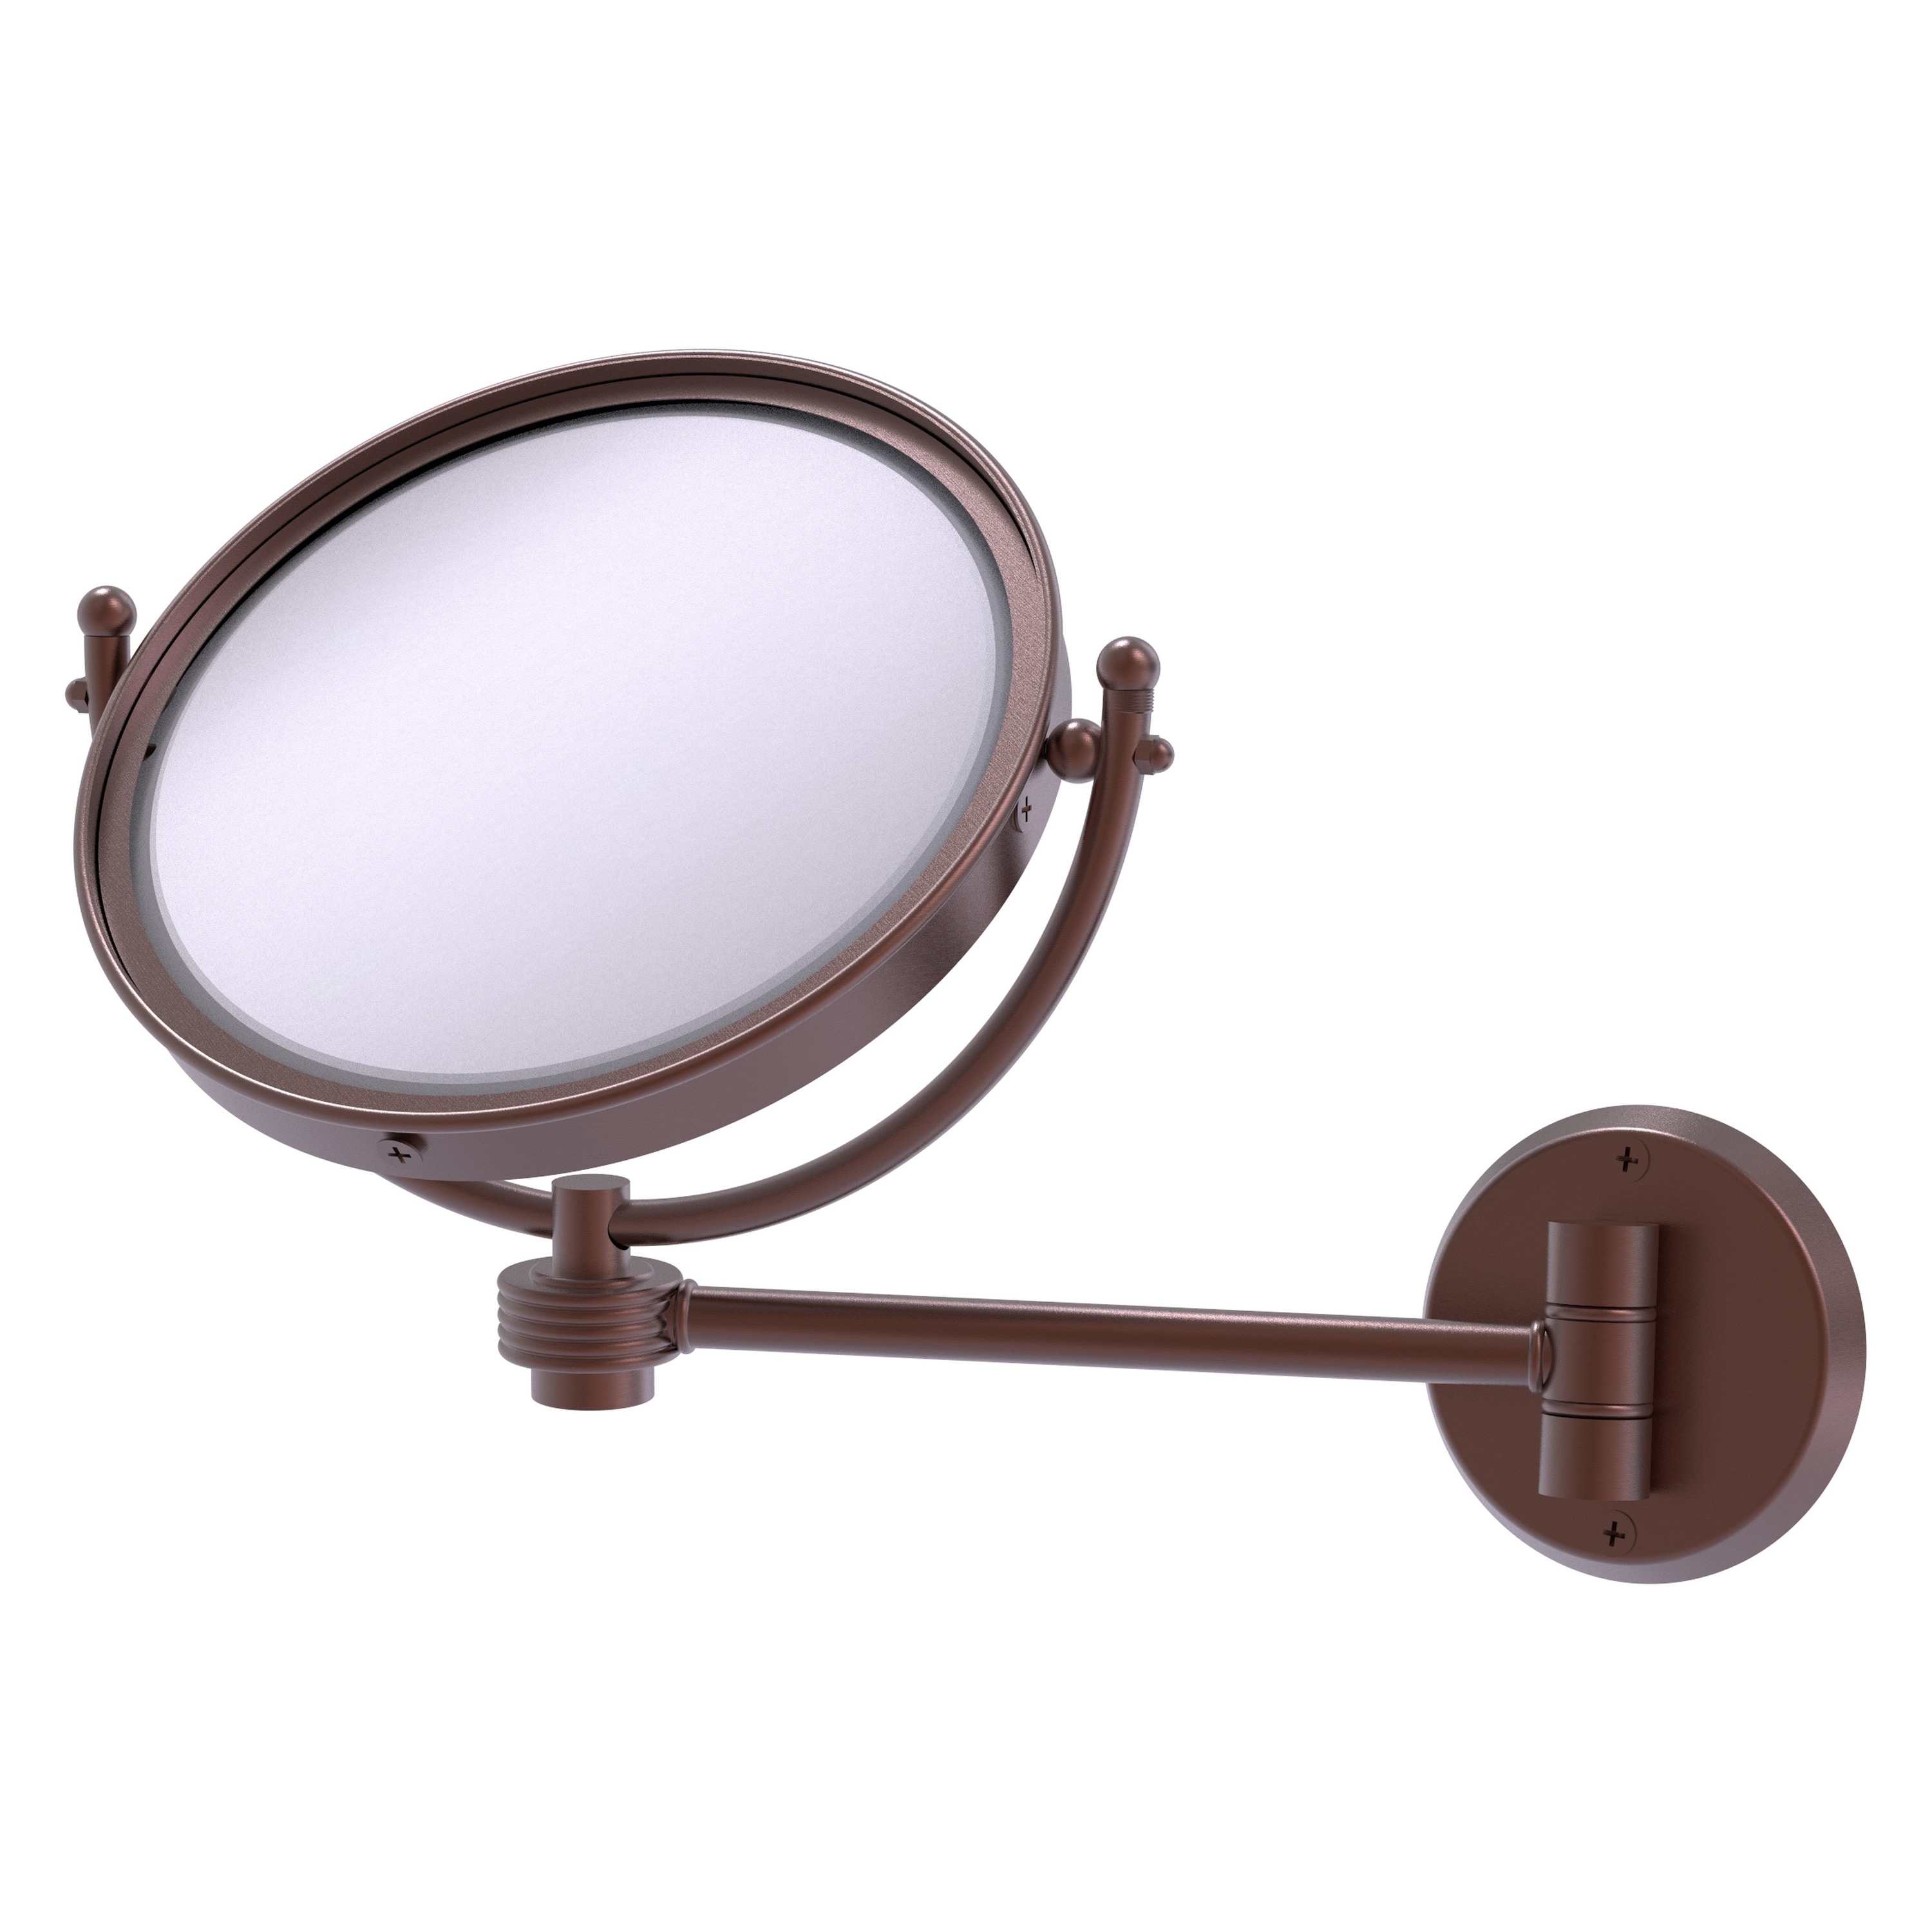 8-in x 10-in Antique Copper Double-sided 3X Magnifying Wall-mounted Vanity Mirror | - Allied Brass WM-5G/3X-CA